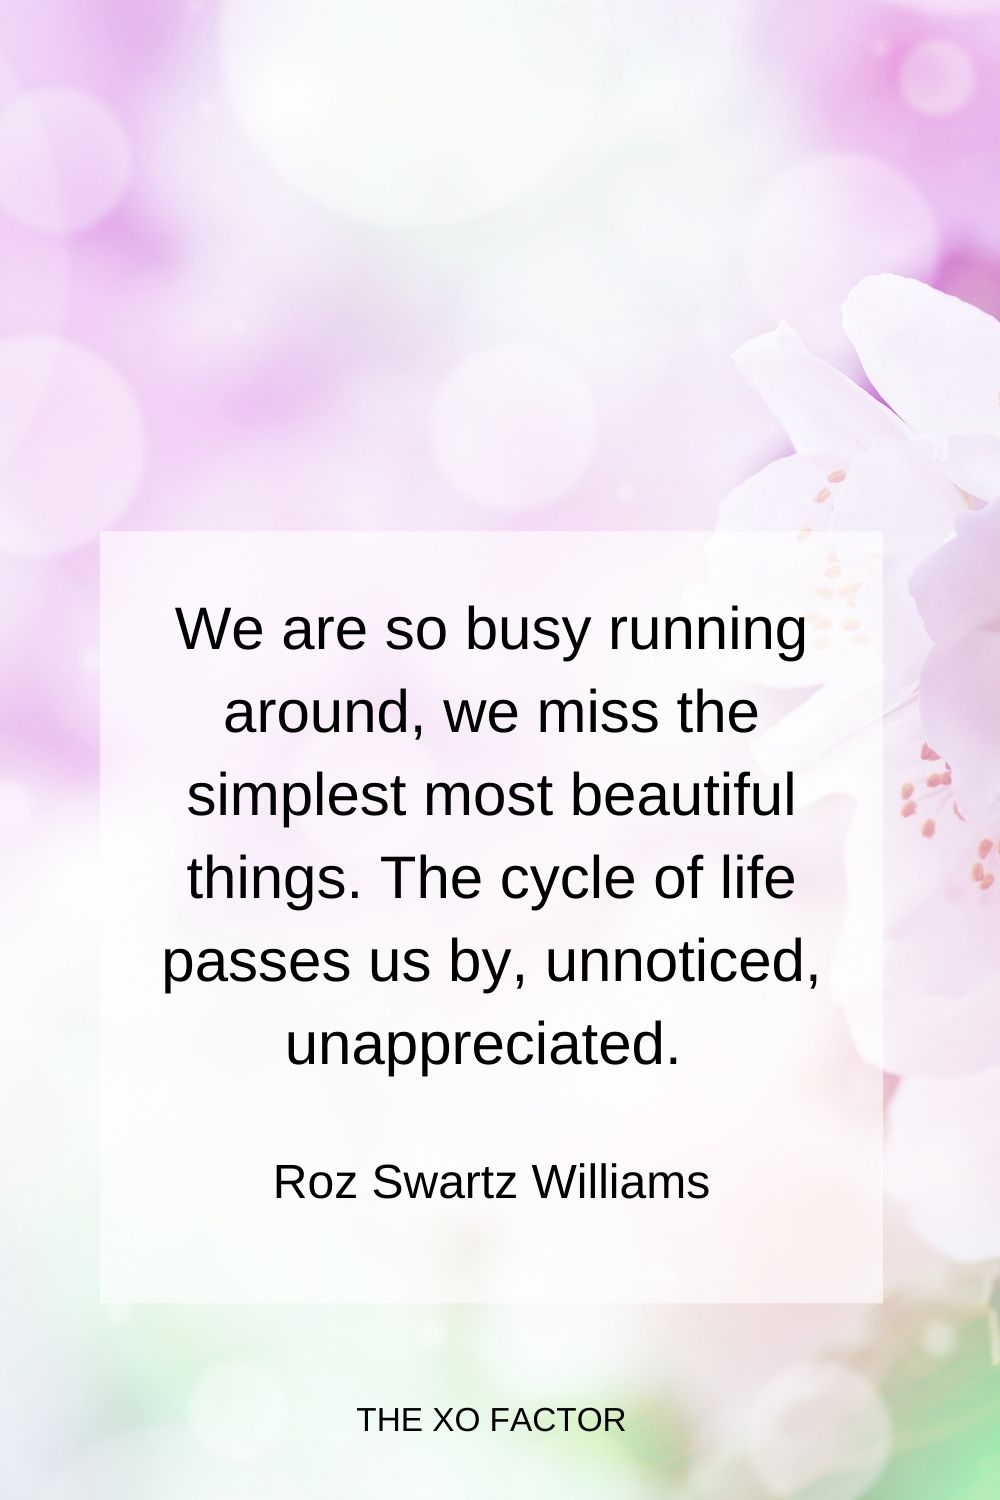 We are so busy running around, we miss the simplest most beautiful things. The cycle of life passes us by, unnoticed, unappreciated.  Roz Swartz Williams